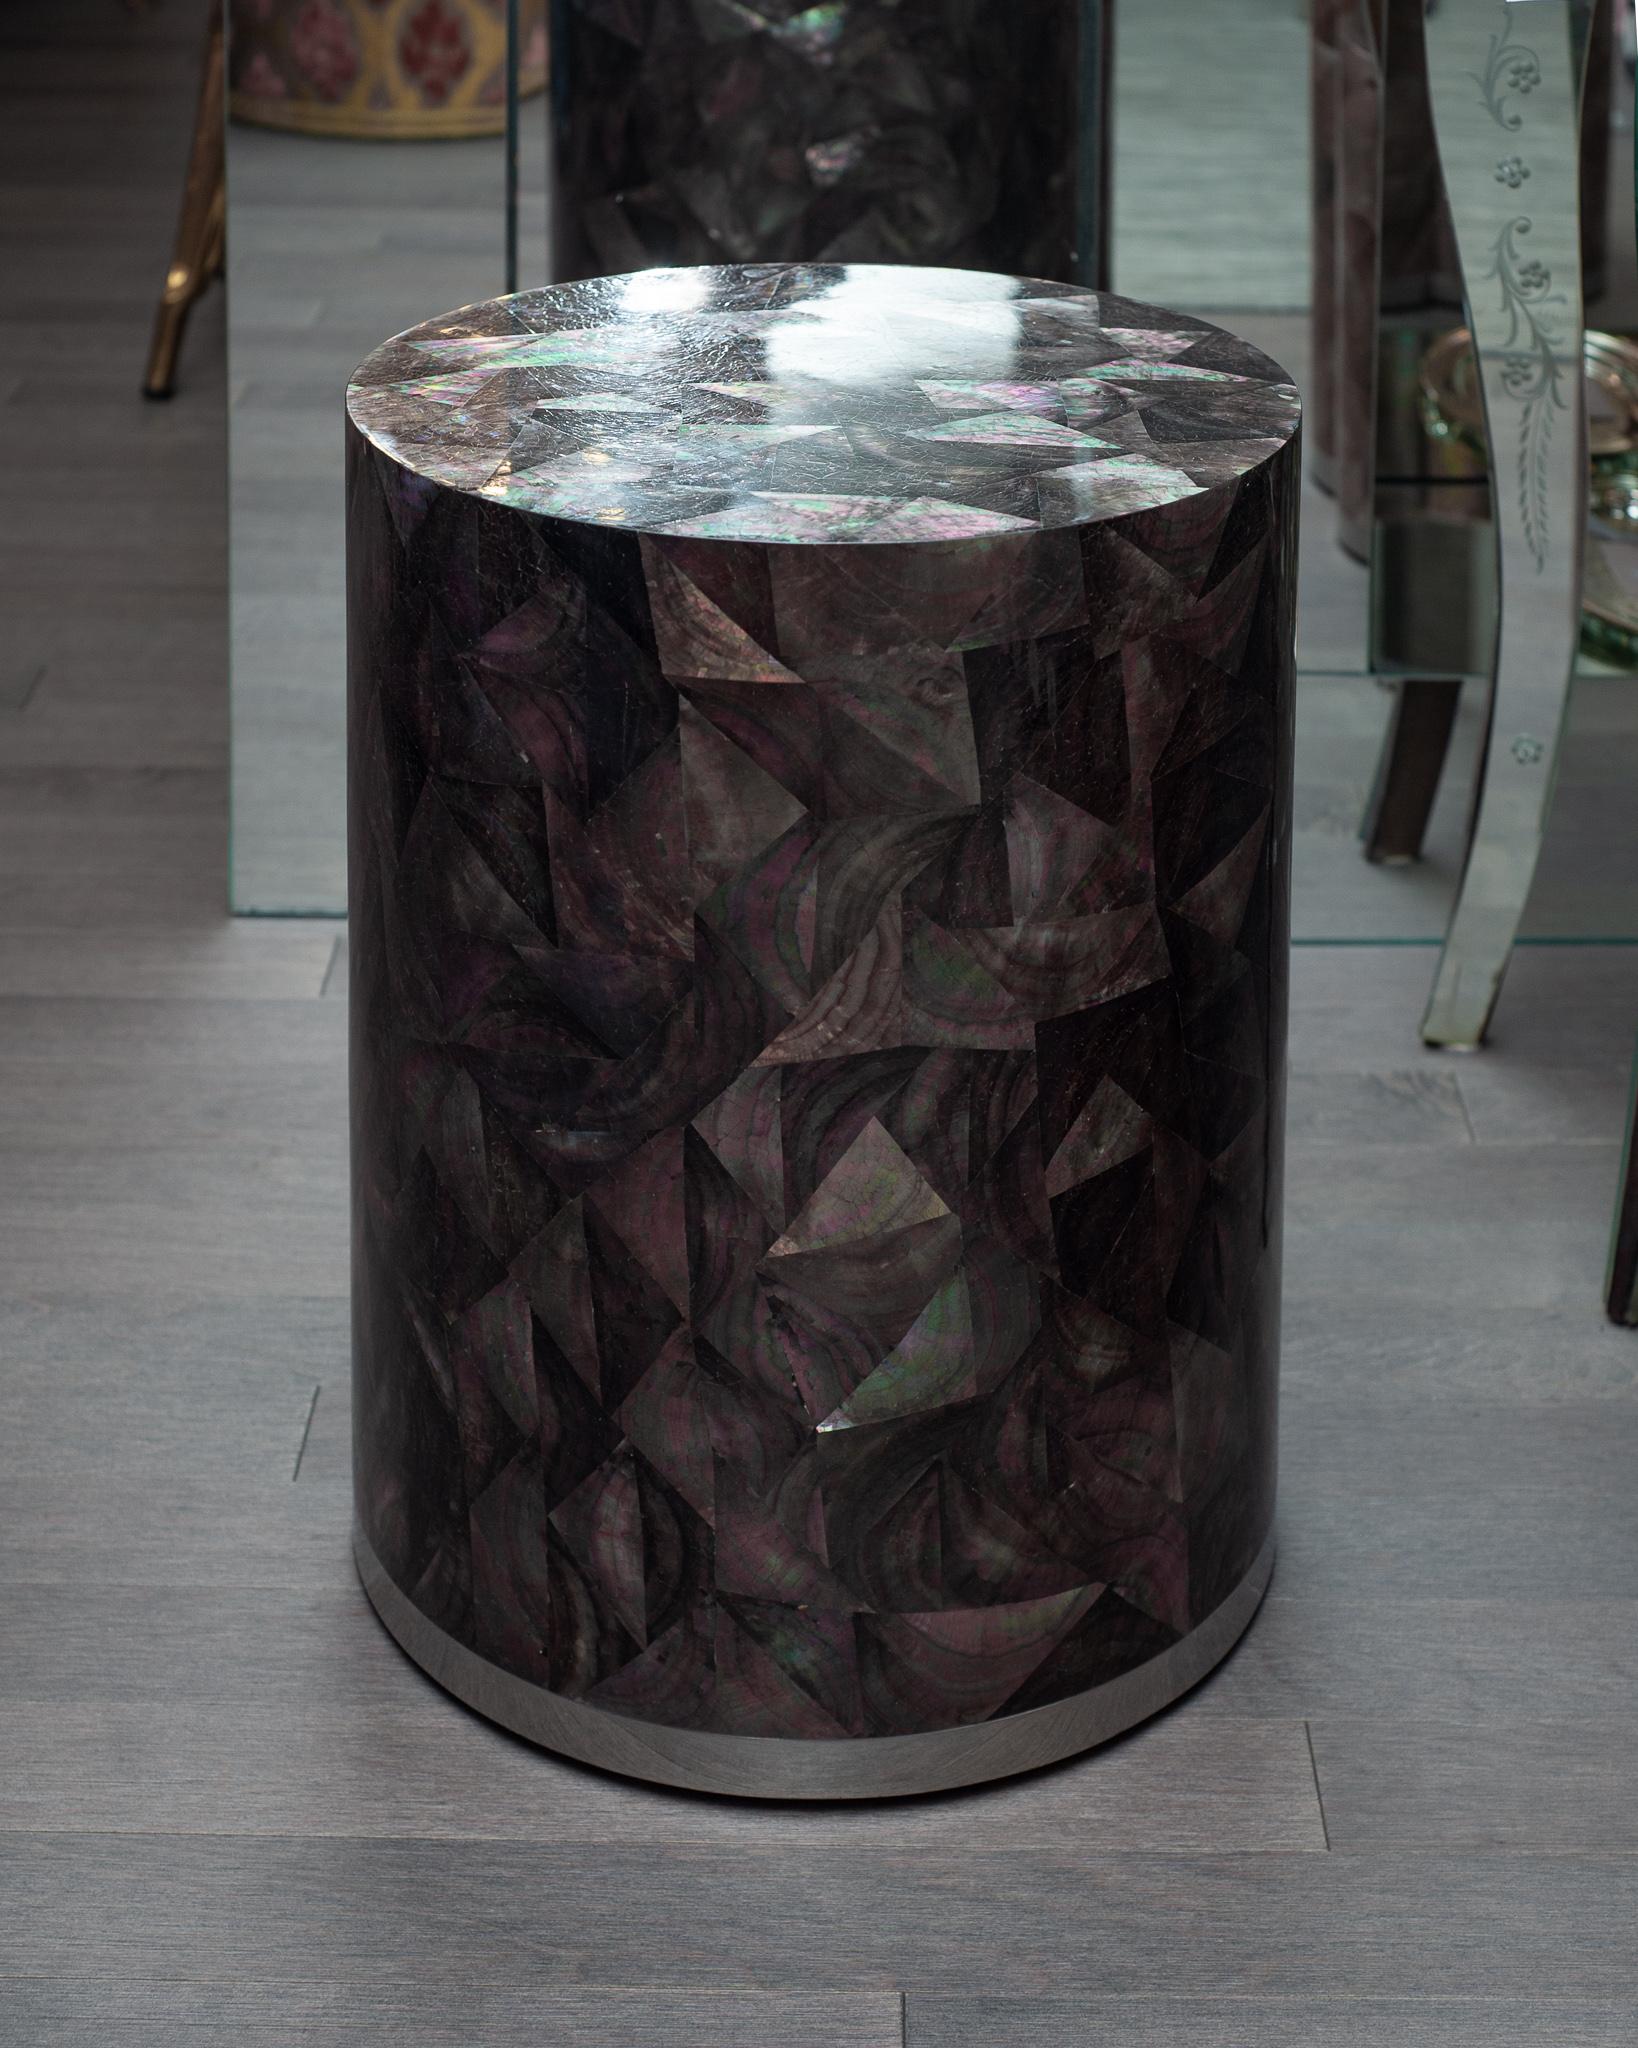 A stunning contemporary drum table finished in black mother of pearl with polished stainless steel trim at the base. Masterfully created and flawlessly executed, this shell drum table boasts a rainbow of tones dispersed amongst the black mother of